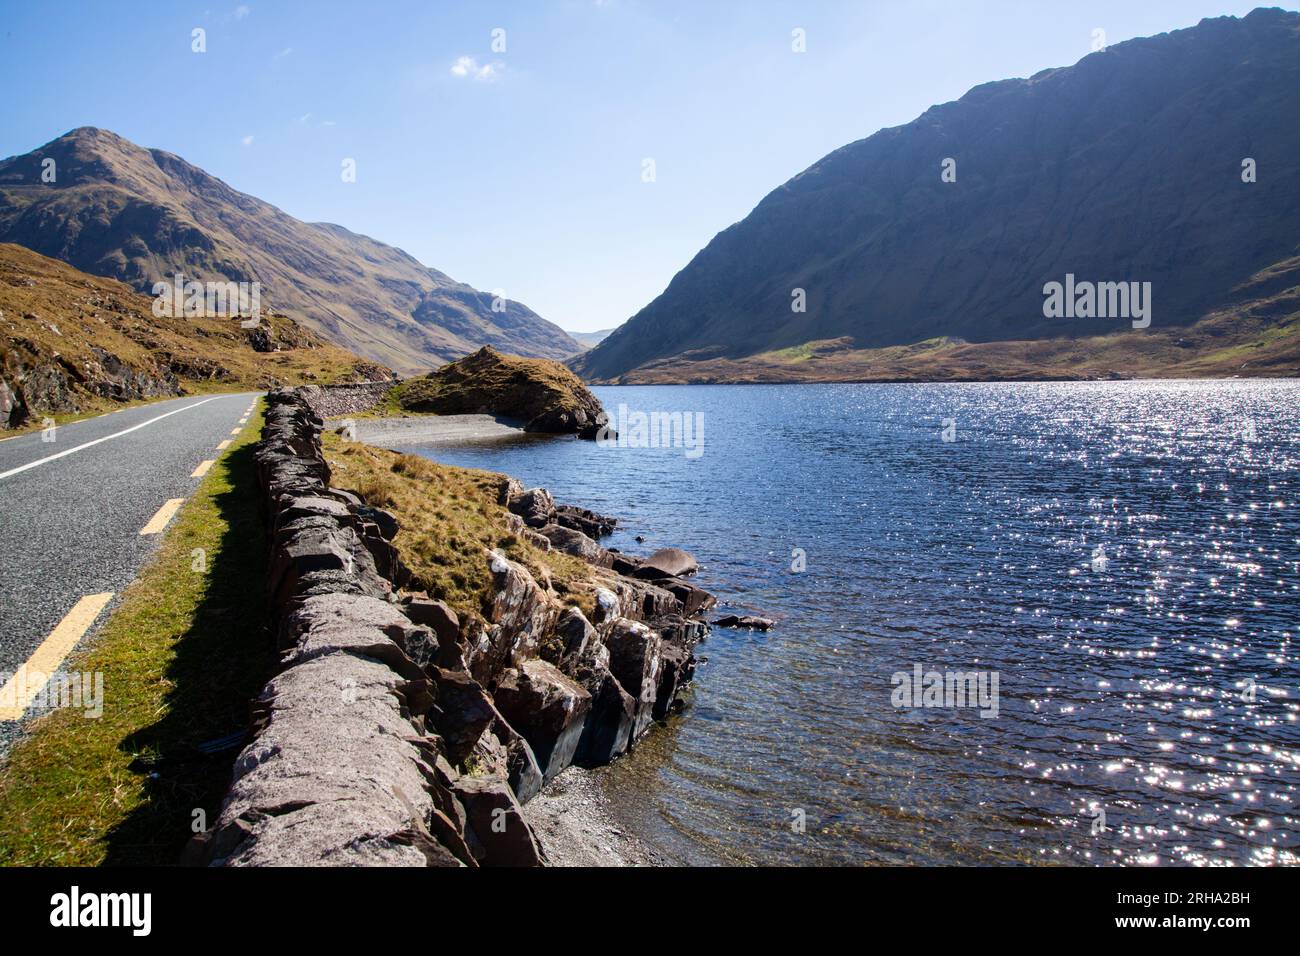 Doulough Valley and Lakes, vicino a Louisburg, Co. Mayo, Irlanda. Foto Stock